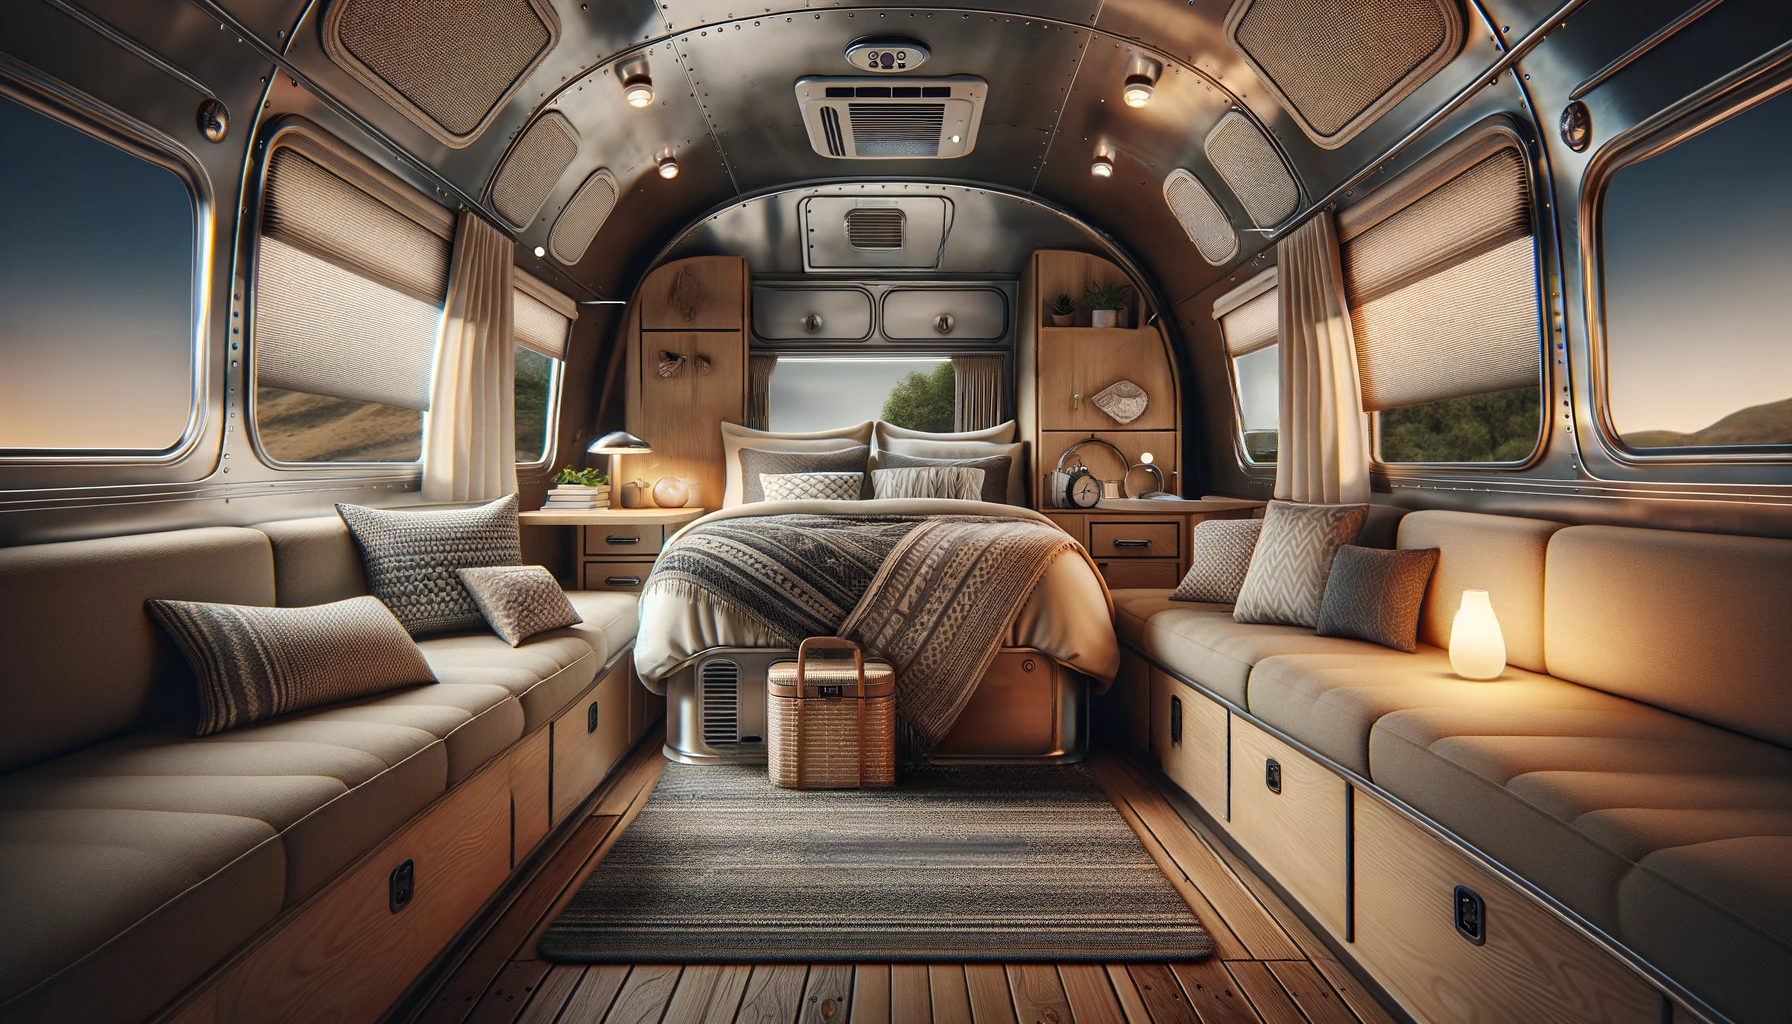 A cozy and inviting Airstream caravan interior, showcasing high-quality bedding, efficient storage, and personal touches, creating a warm and relaxing sleep environment with soft lighting and soundproofing elements for a restful caravan experience.